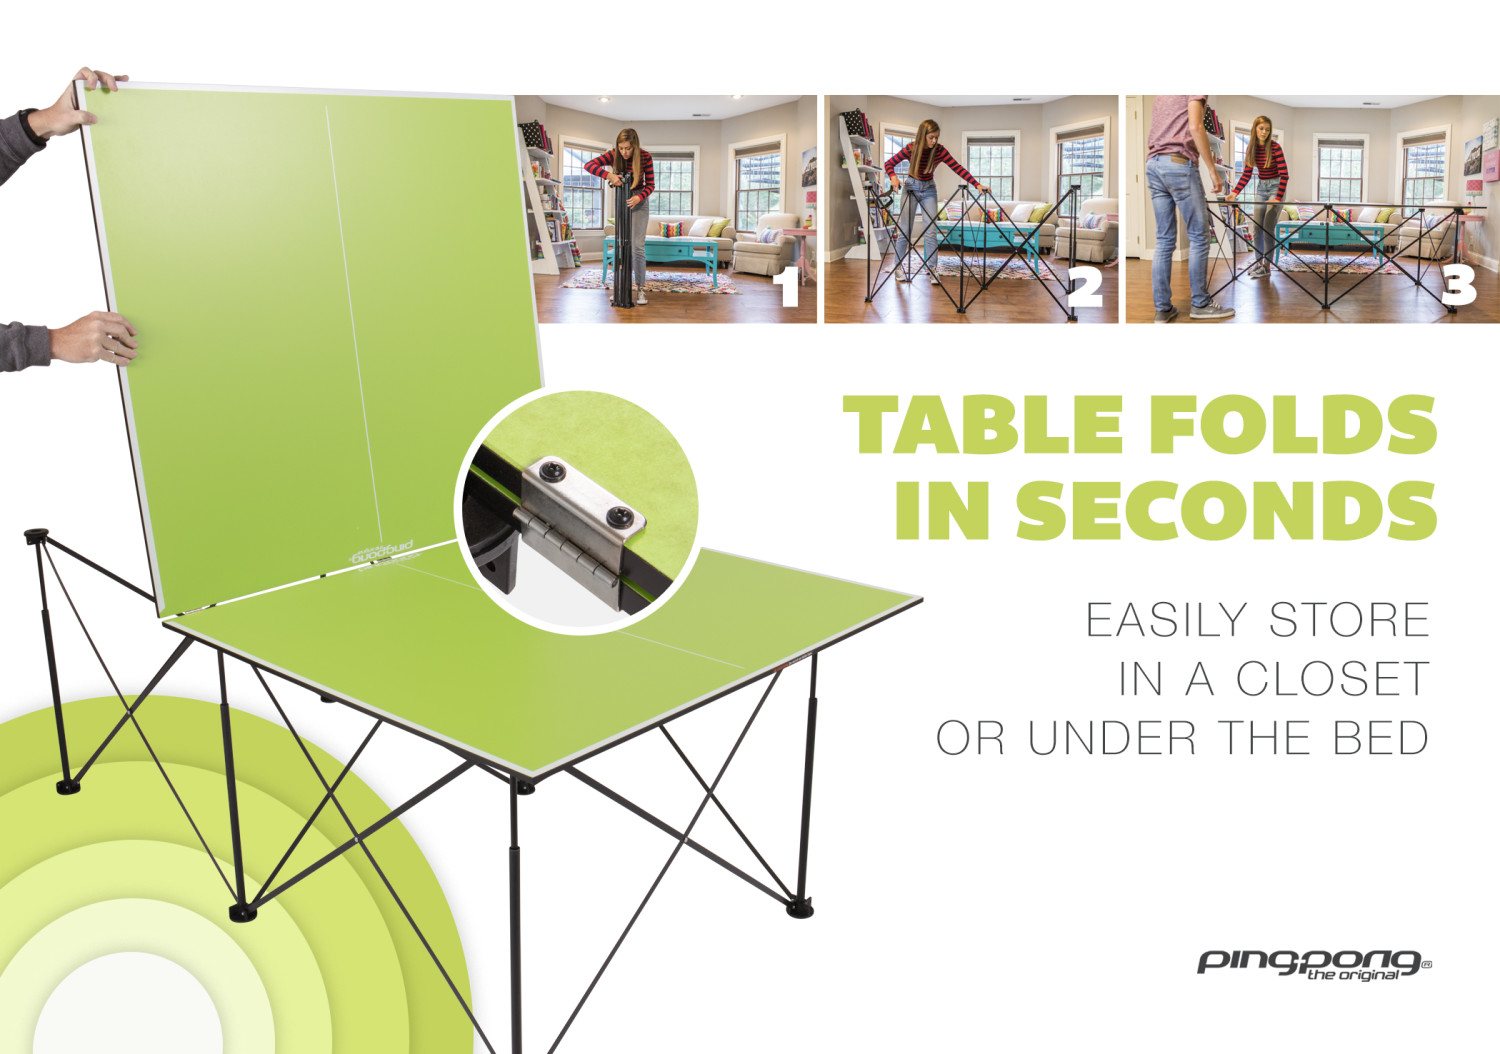 Ping-Pong 7' Instant Play Pop-Up Compact Table Tennis Table with No Tools or Assembly Required ? Green - image 3 of 14